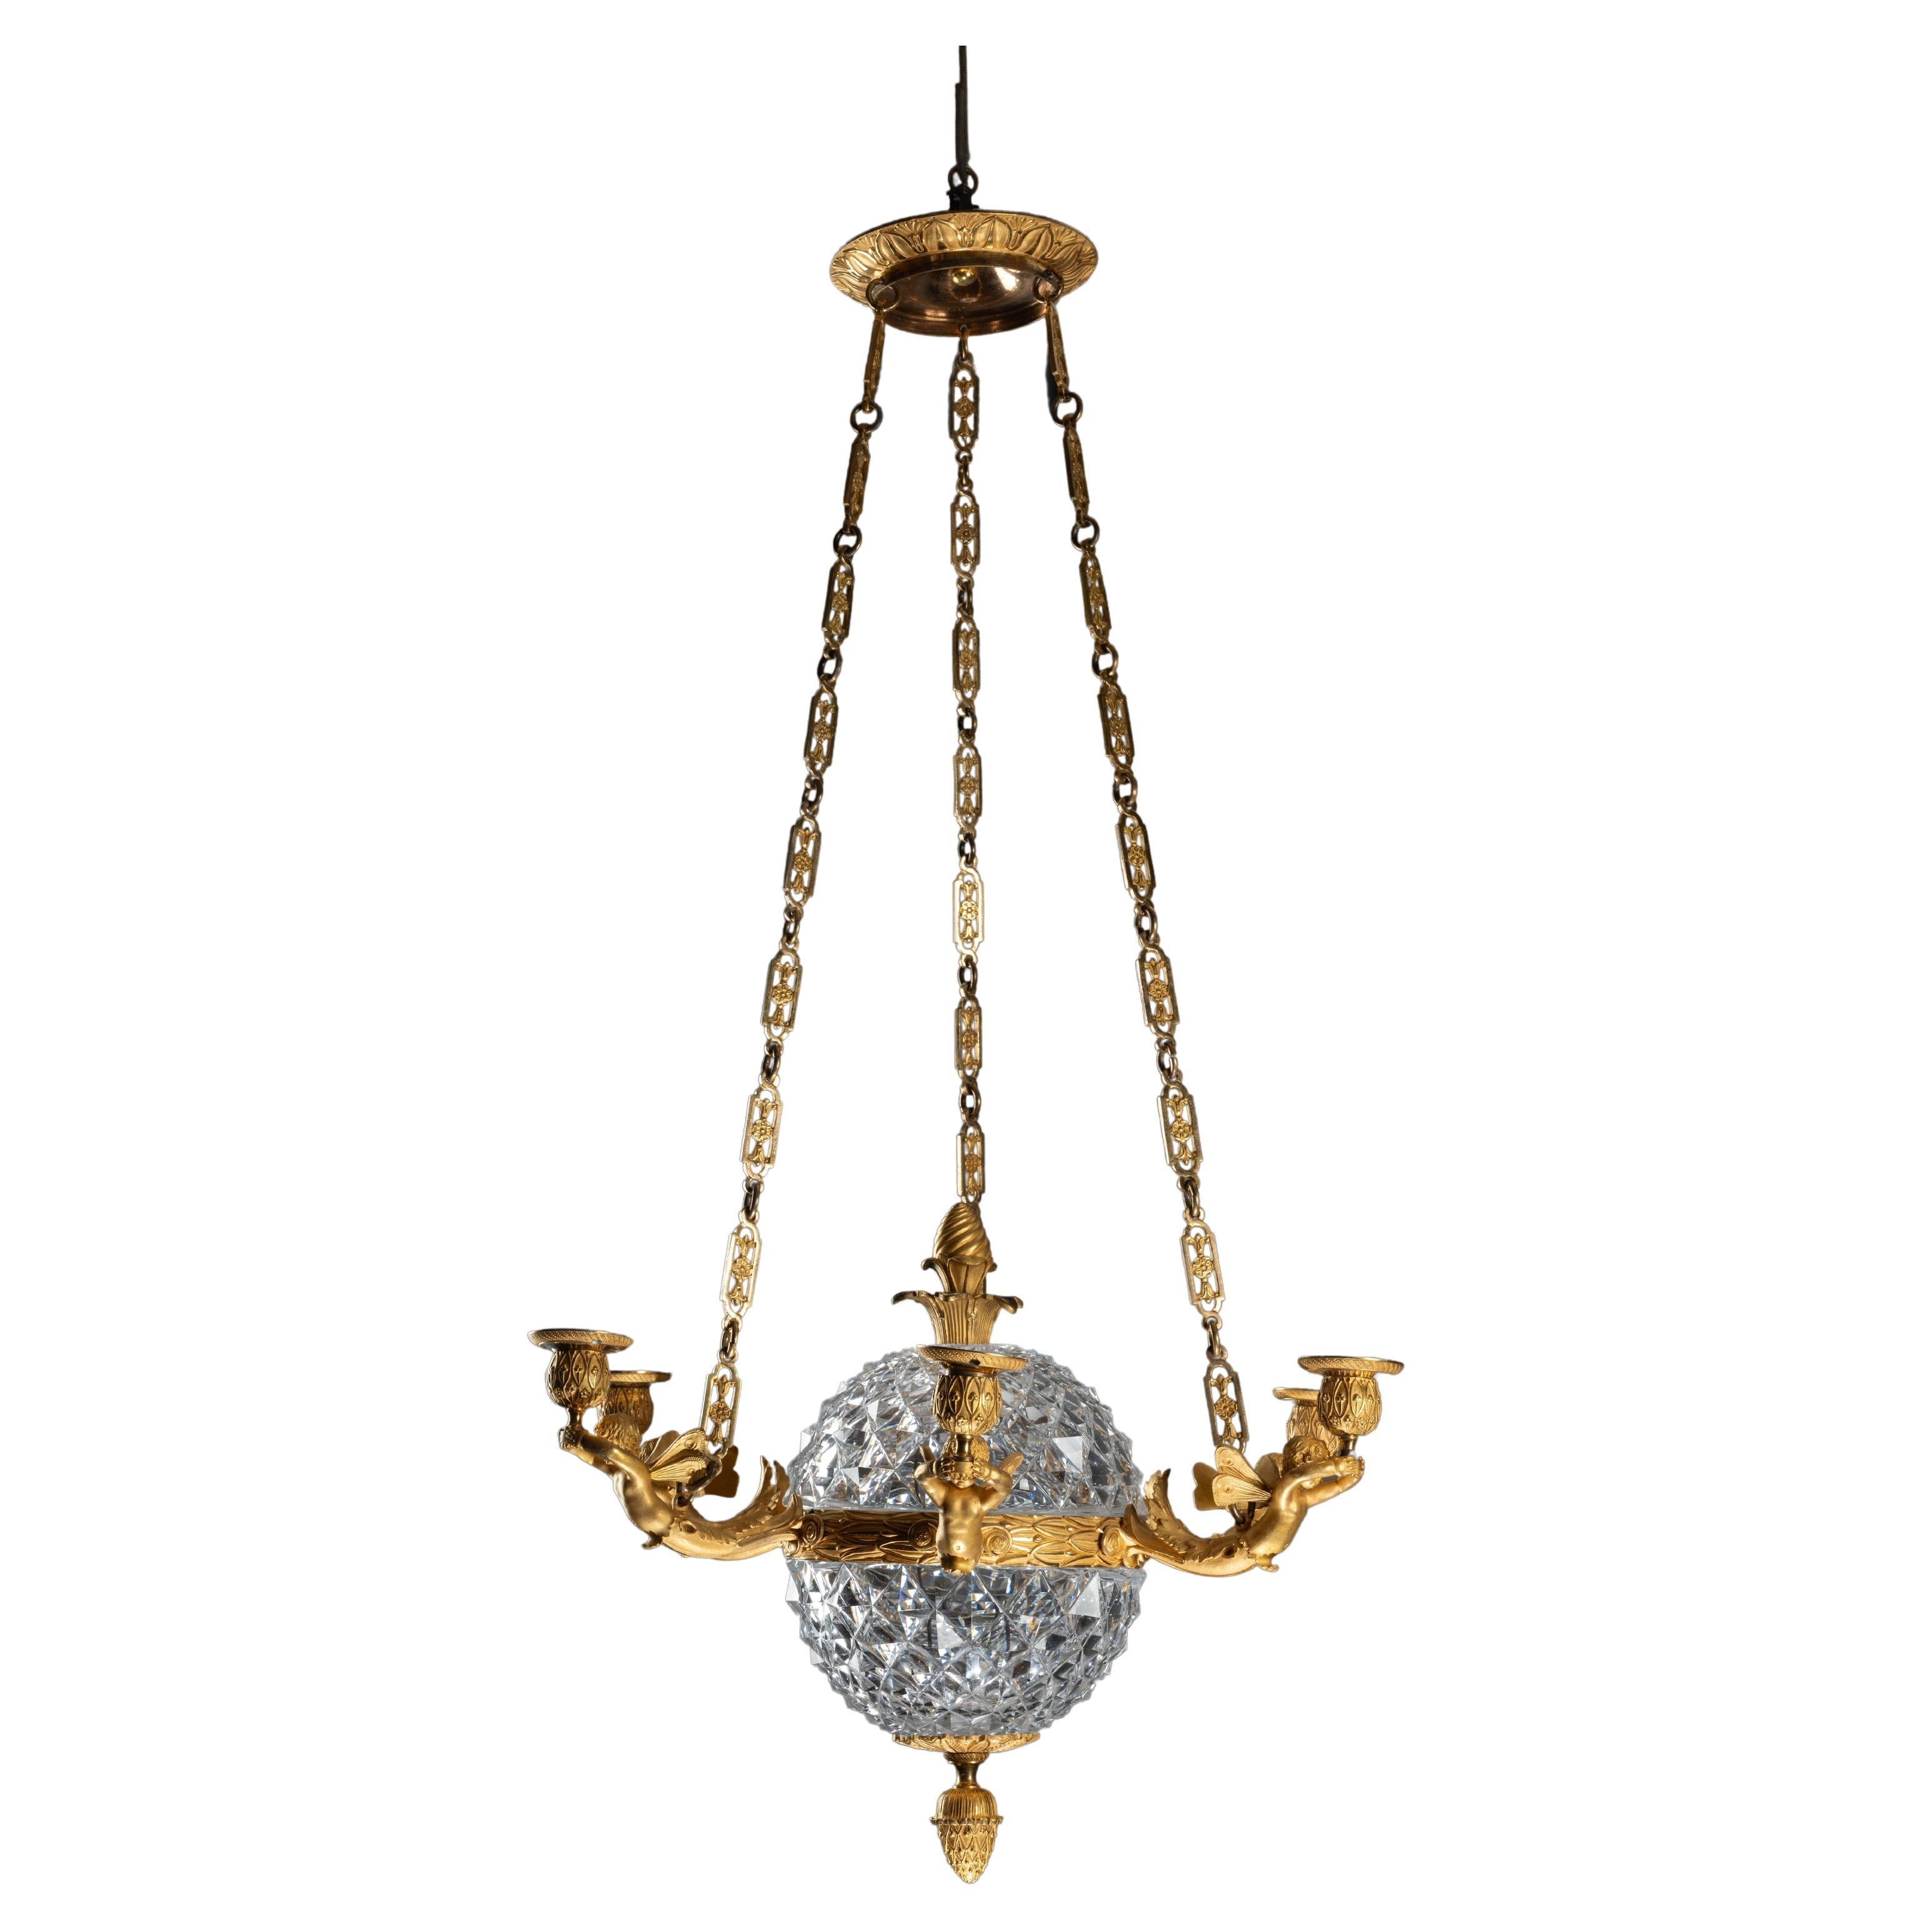 An Empire c. 1810 gilt bronze and crystal chandelier attributed to Ravrio, Paris